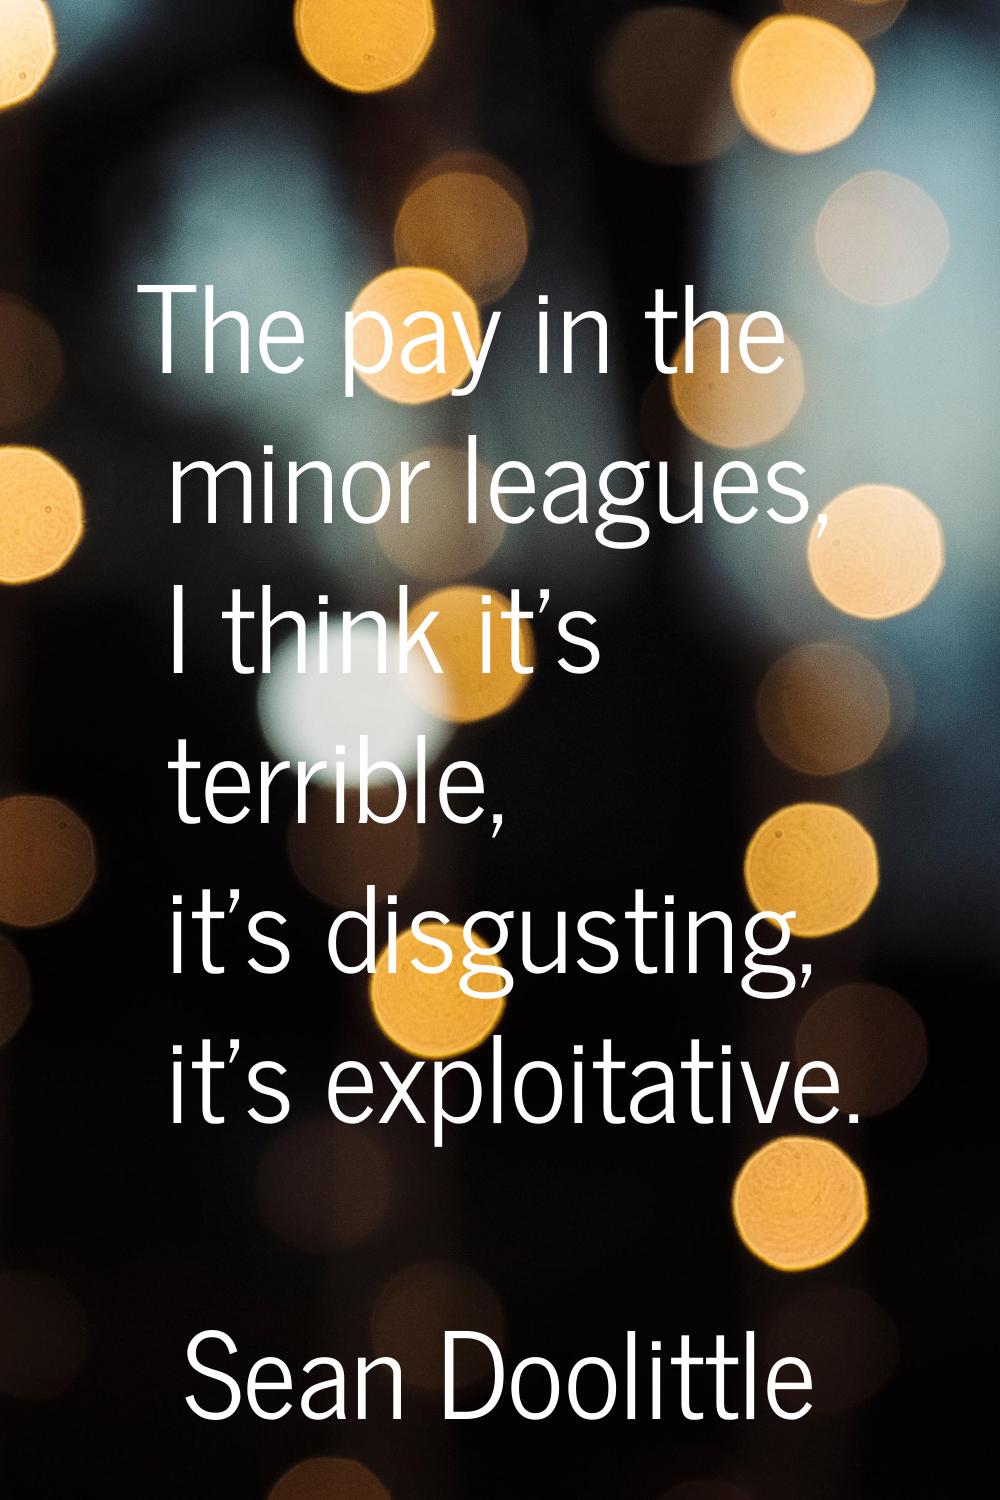 The pay in the minor leagues, I think it's terrible, it's disgusting, it's exploitative.